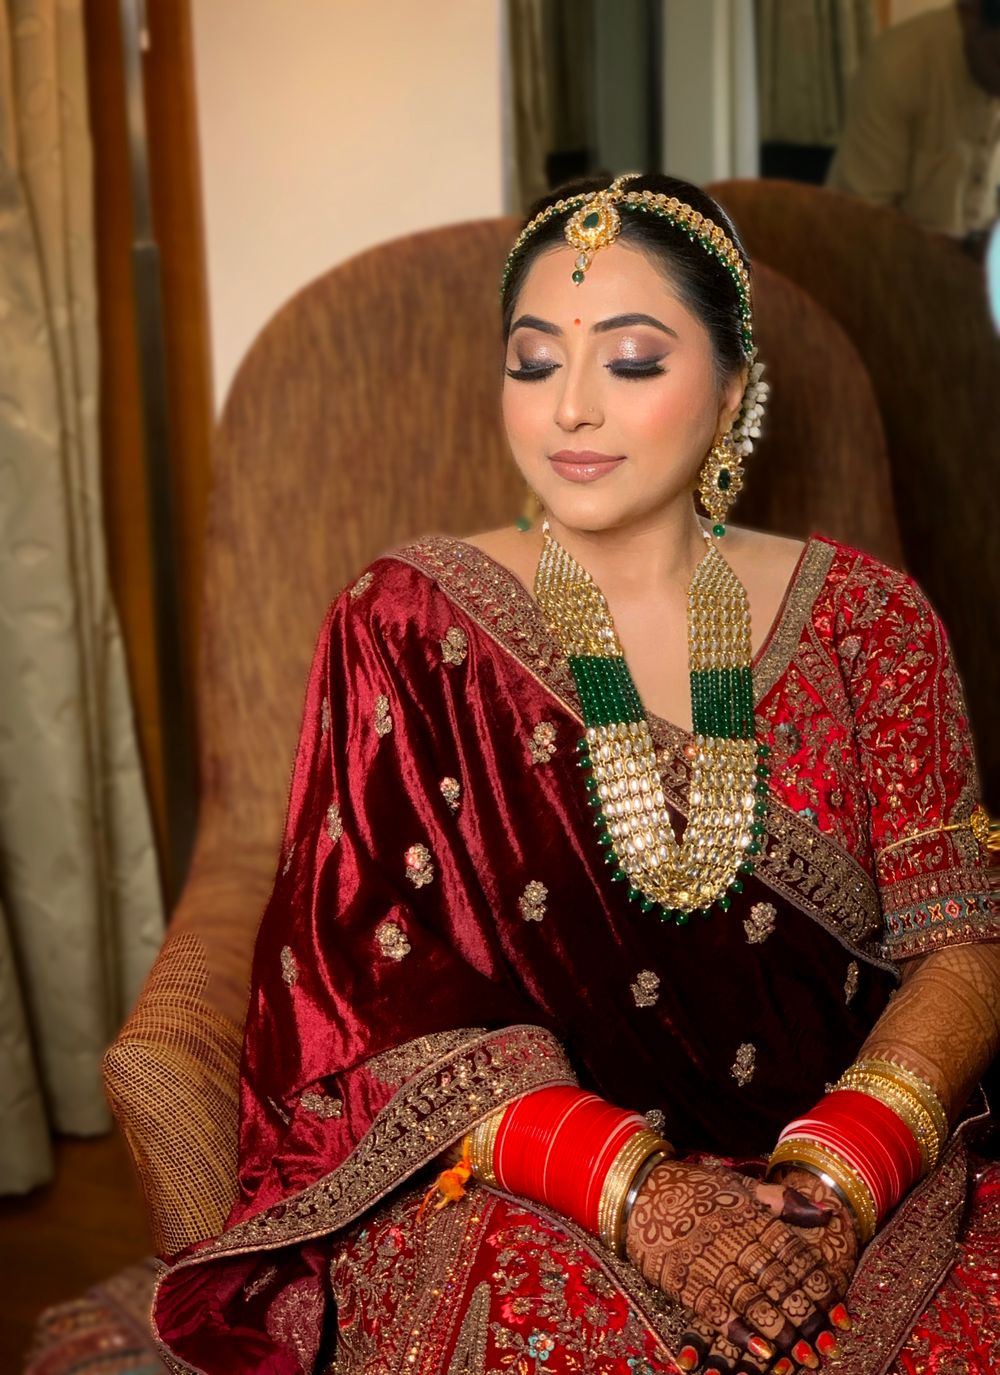 Photo By PlushBrides by Archana - Bridal Makeup